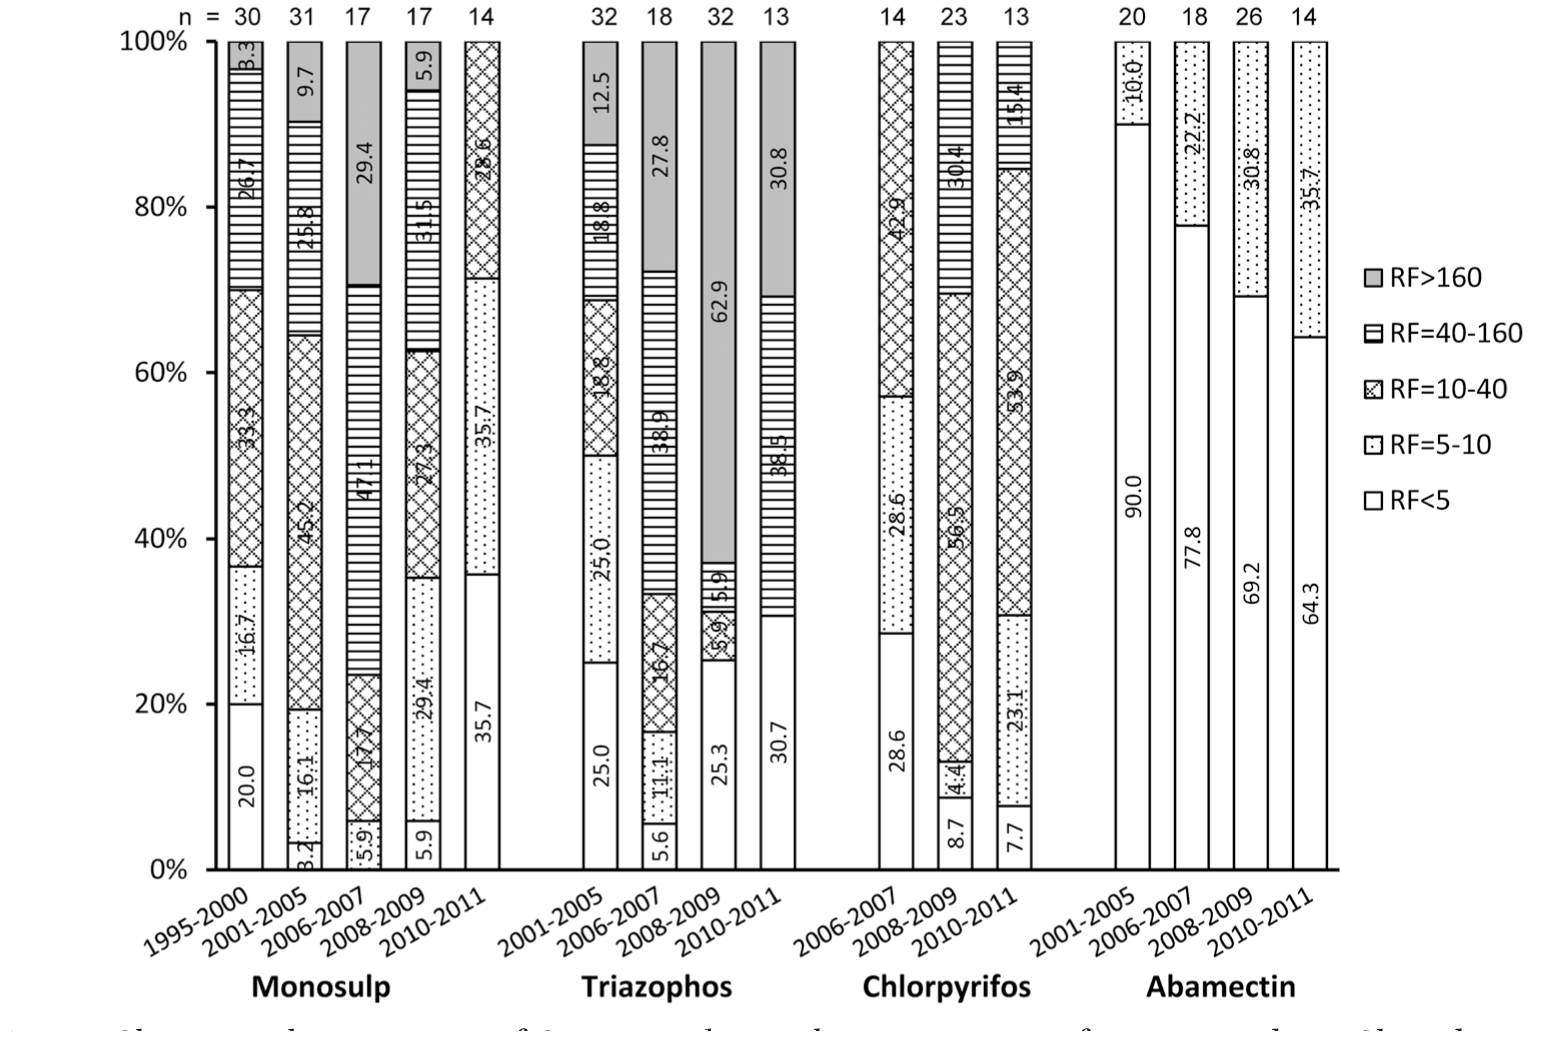 Changes In Insecticide Resistance Of The Rice Striped Stem Borer Lepidoptera Crambidae